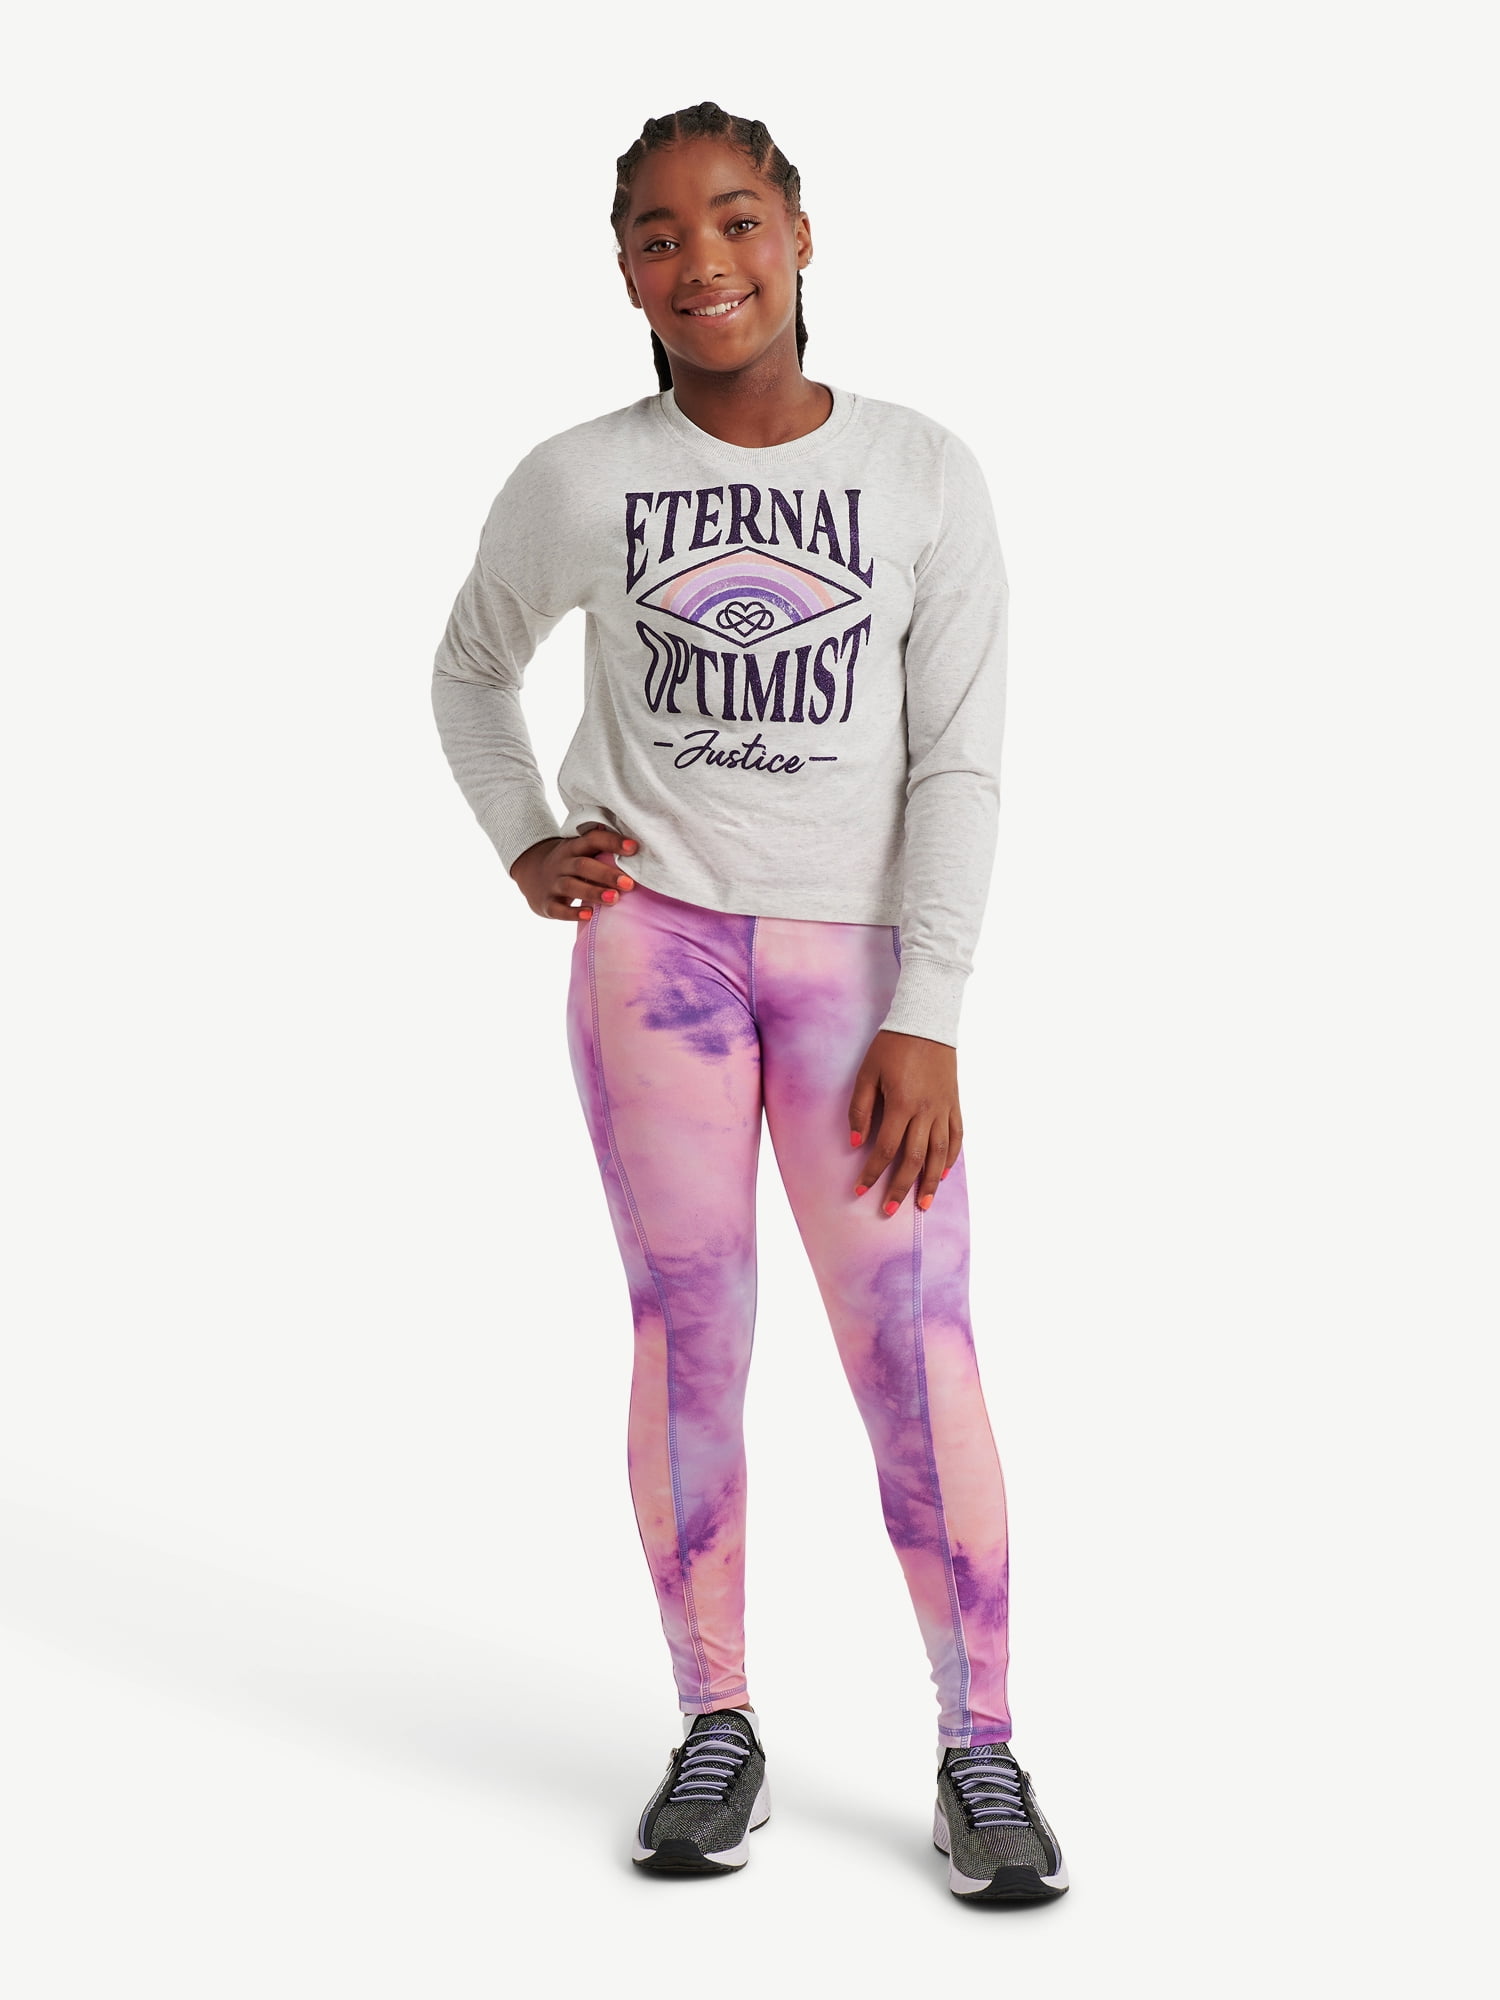 Justice Girls Long Sleeve Tee and Legging, 2-Piece Active Outfit